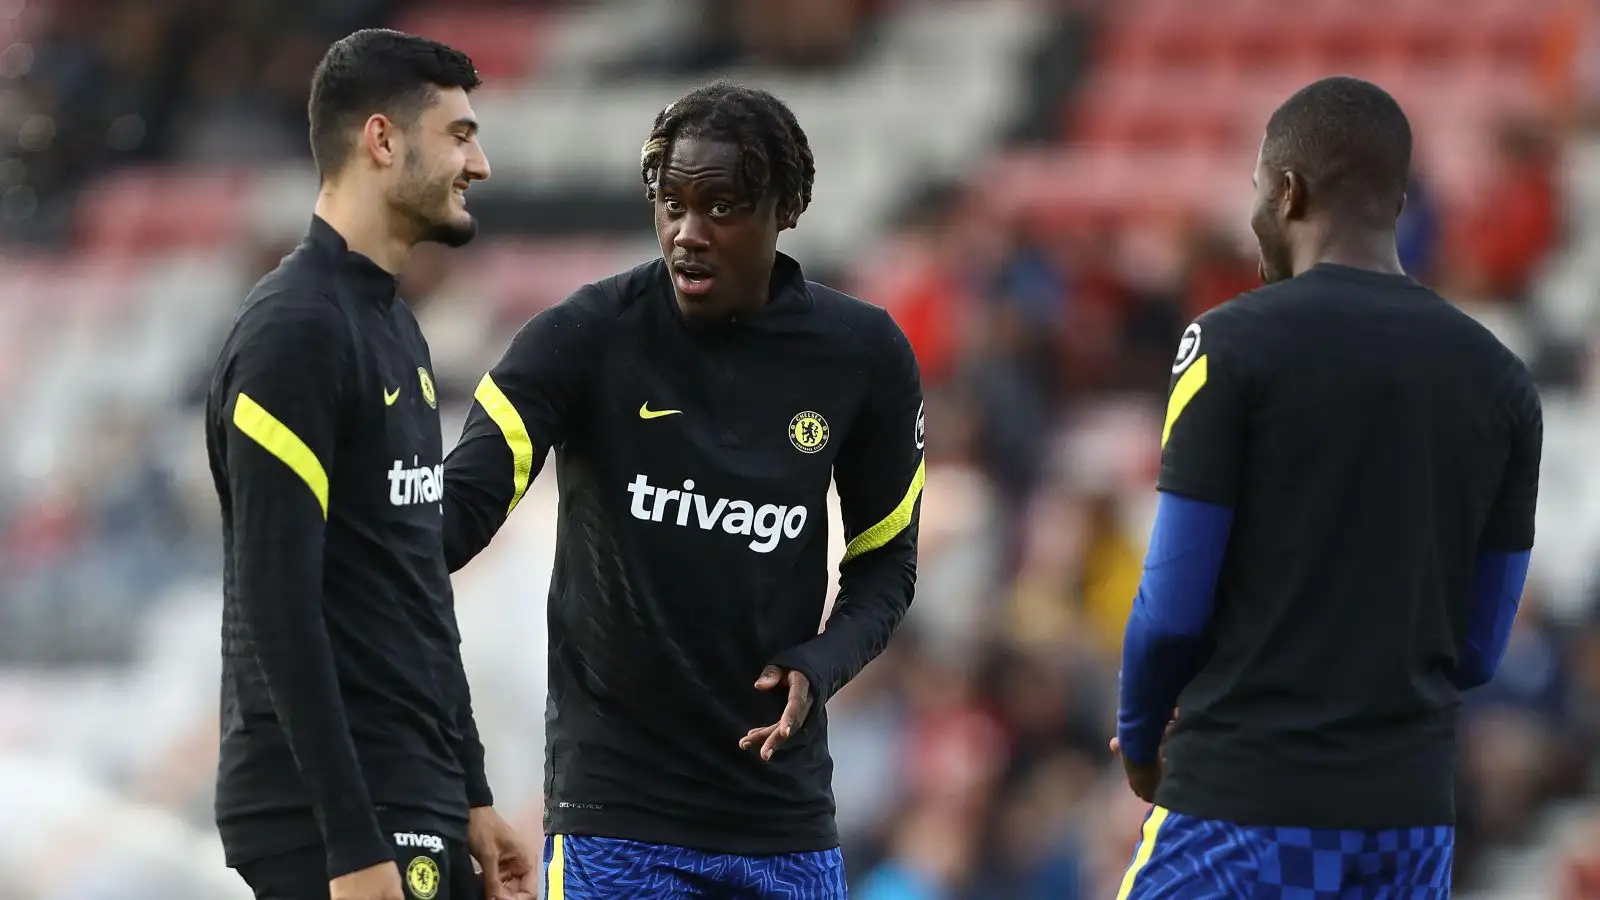 Chelsea duo Trevoh Chalobah and also Armando Broja